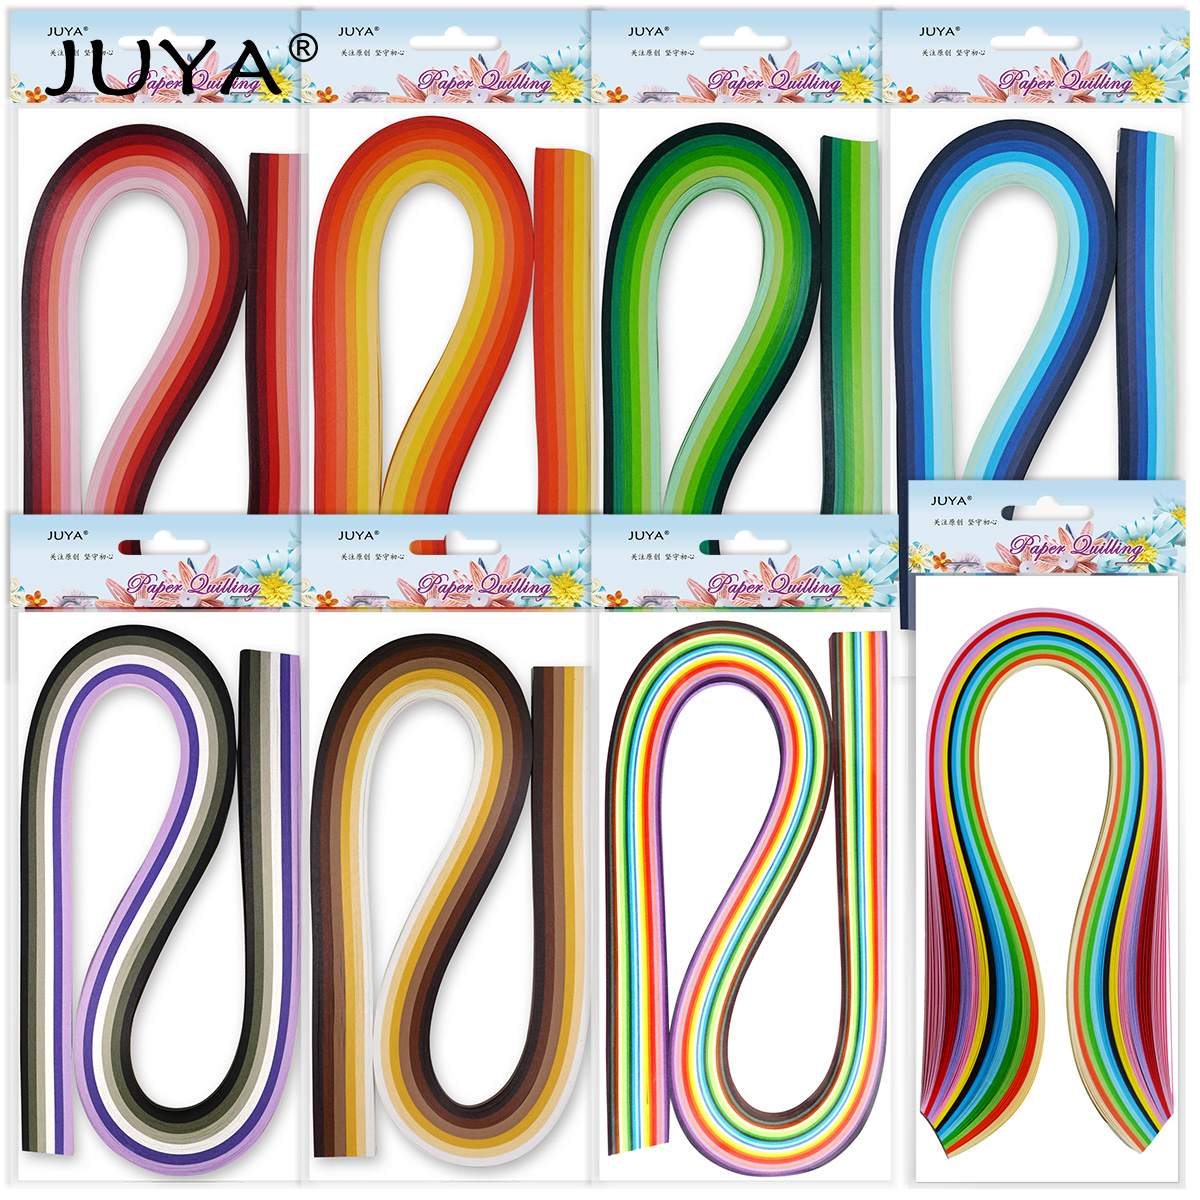 Buy juya quilling tools Online in Bosnia and Herzegovina at Low